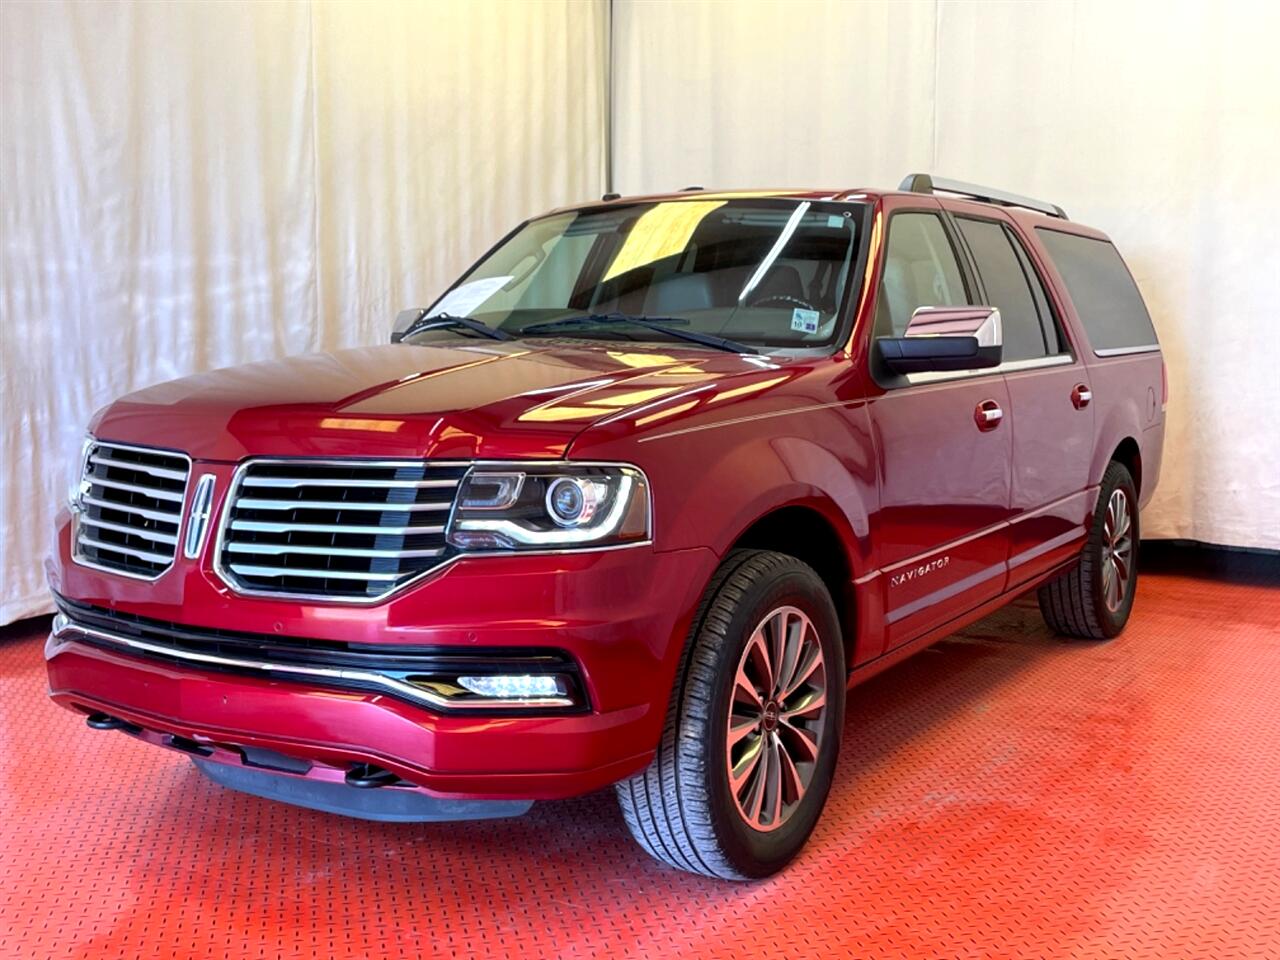 Used 2017 Lincoln Navigator L 4x2 Select for Sale in Minden LA 71055  Carroway Pre-Owned